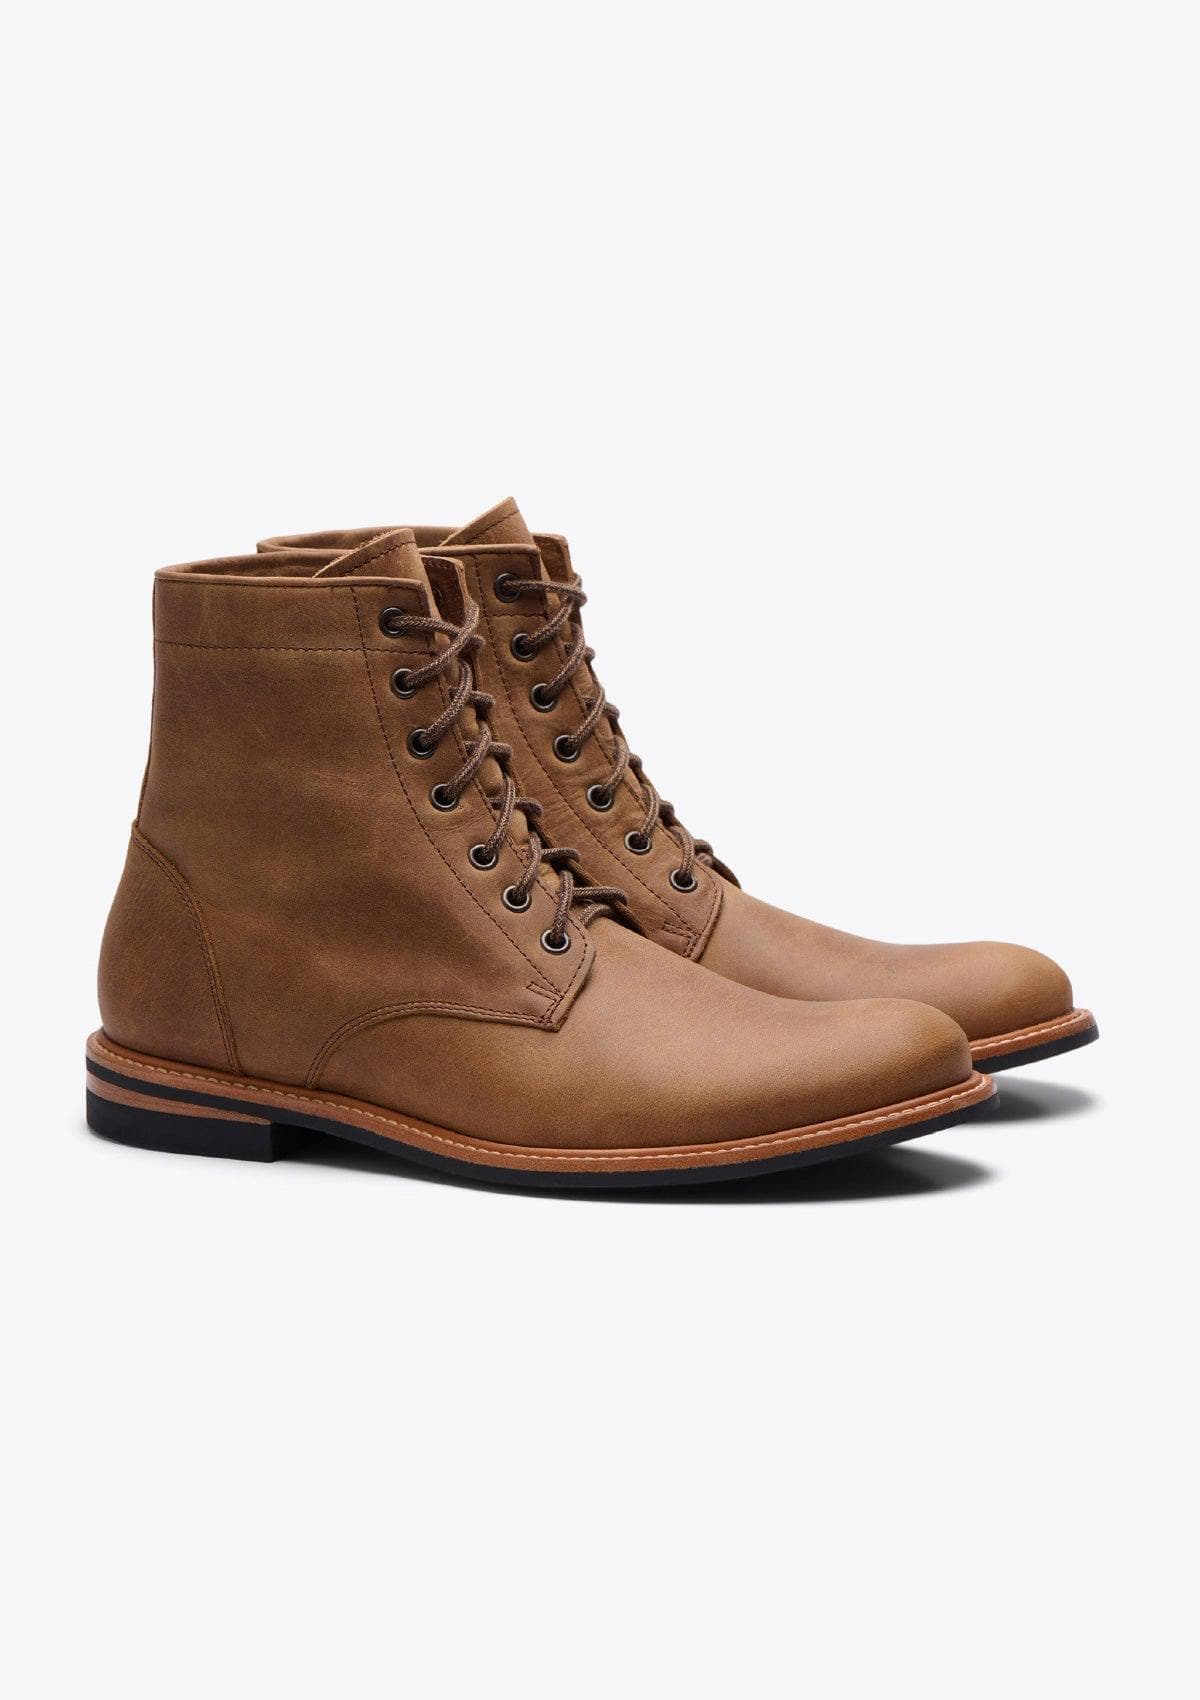 All-Weather Andres Boots - Tobacco